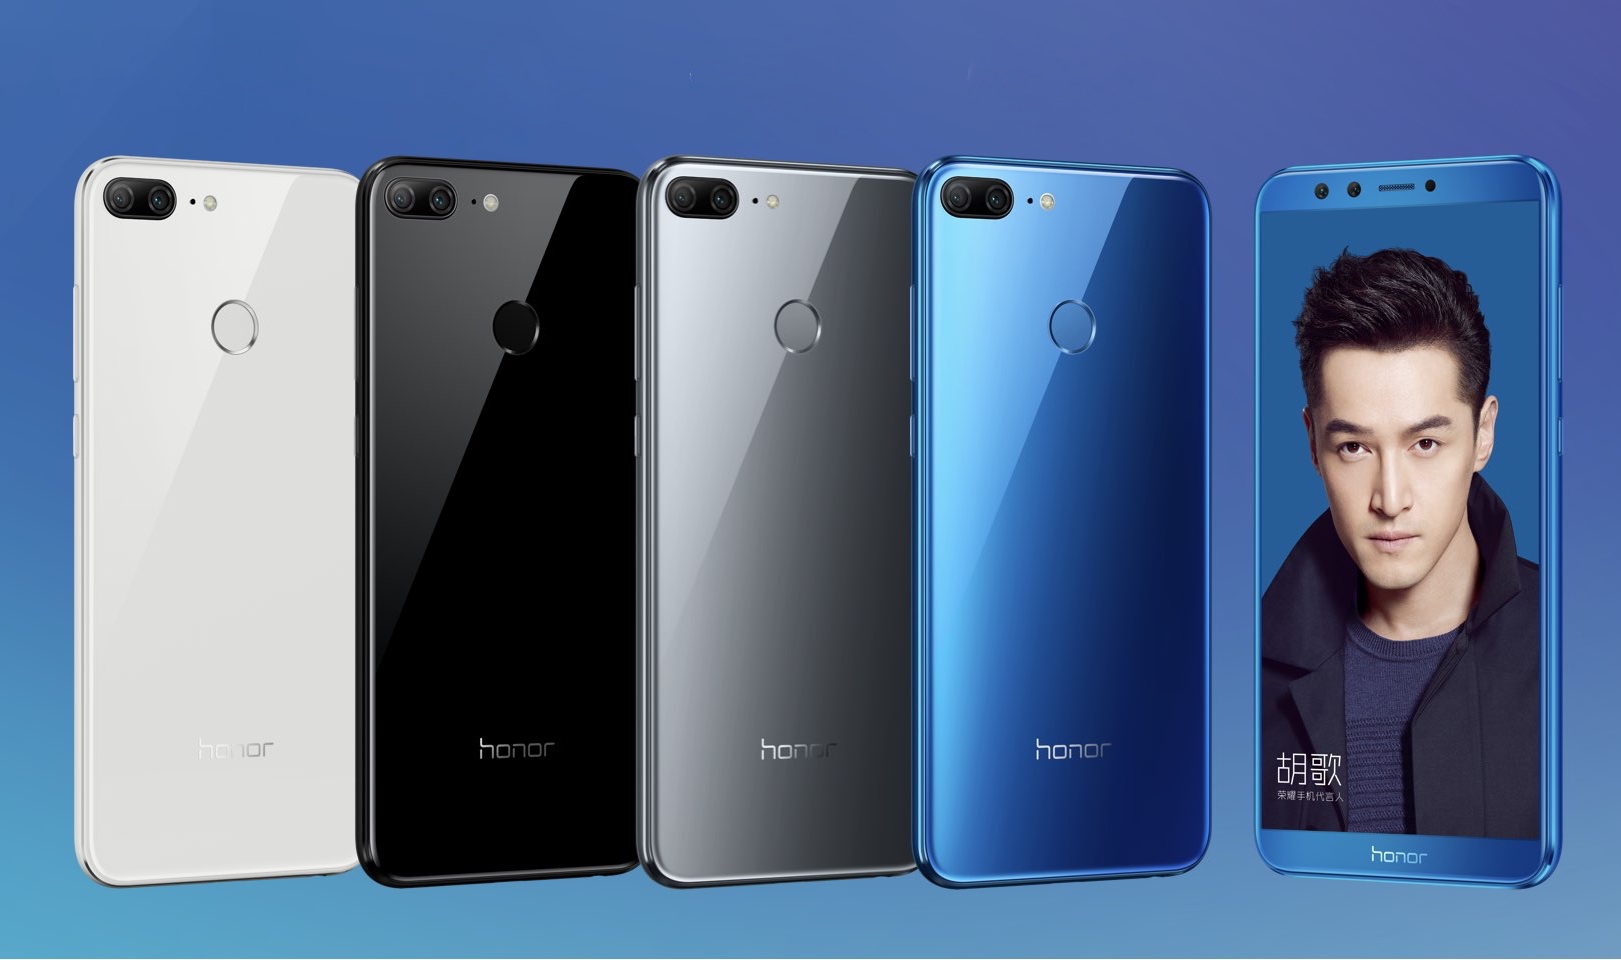  Honor 9 Lite May Be Arriving In Malaysia Soon Lowyat NET